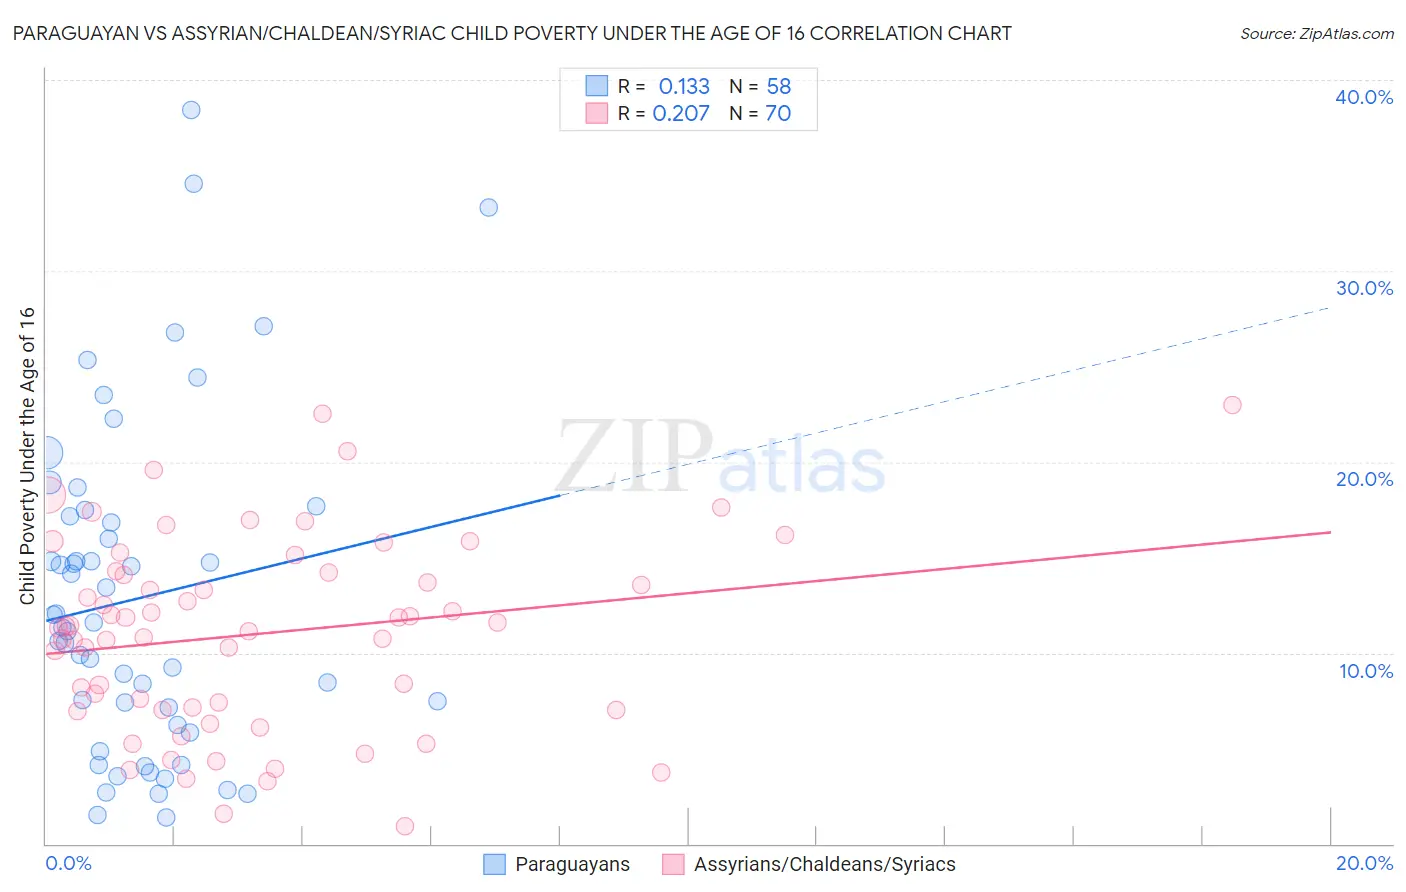 Paraguayan vs Assyrian/Chaldean/Syriac Child Poverty Under the Age of 16